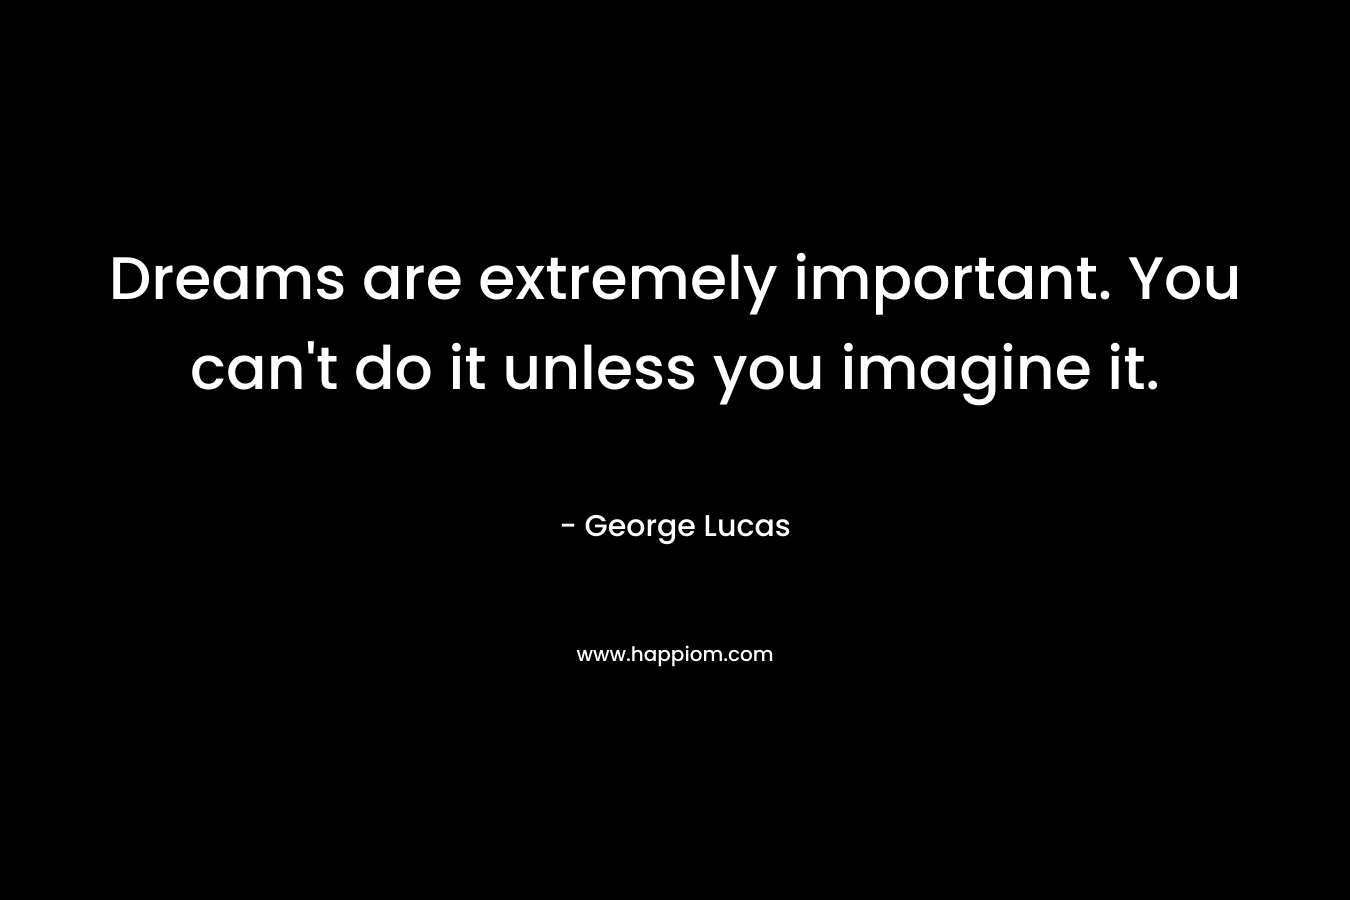 Dreams are extremely important. You can't do it unless you imagine it.